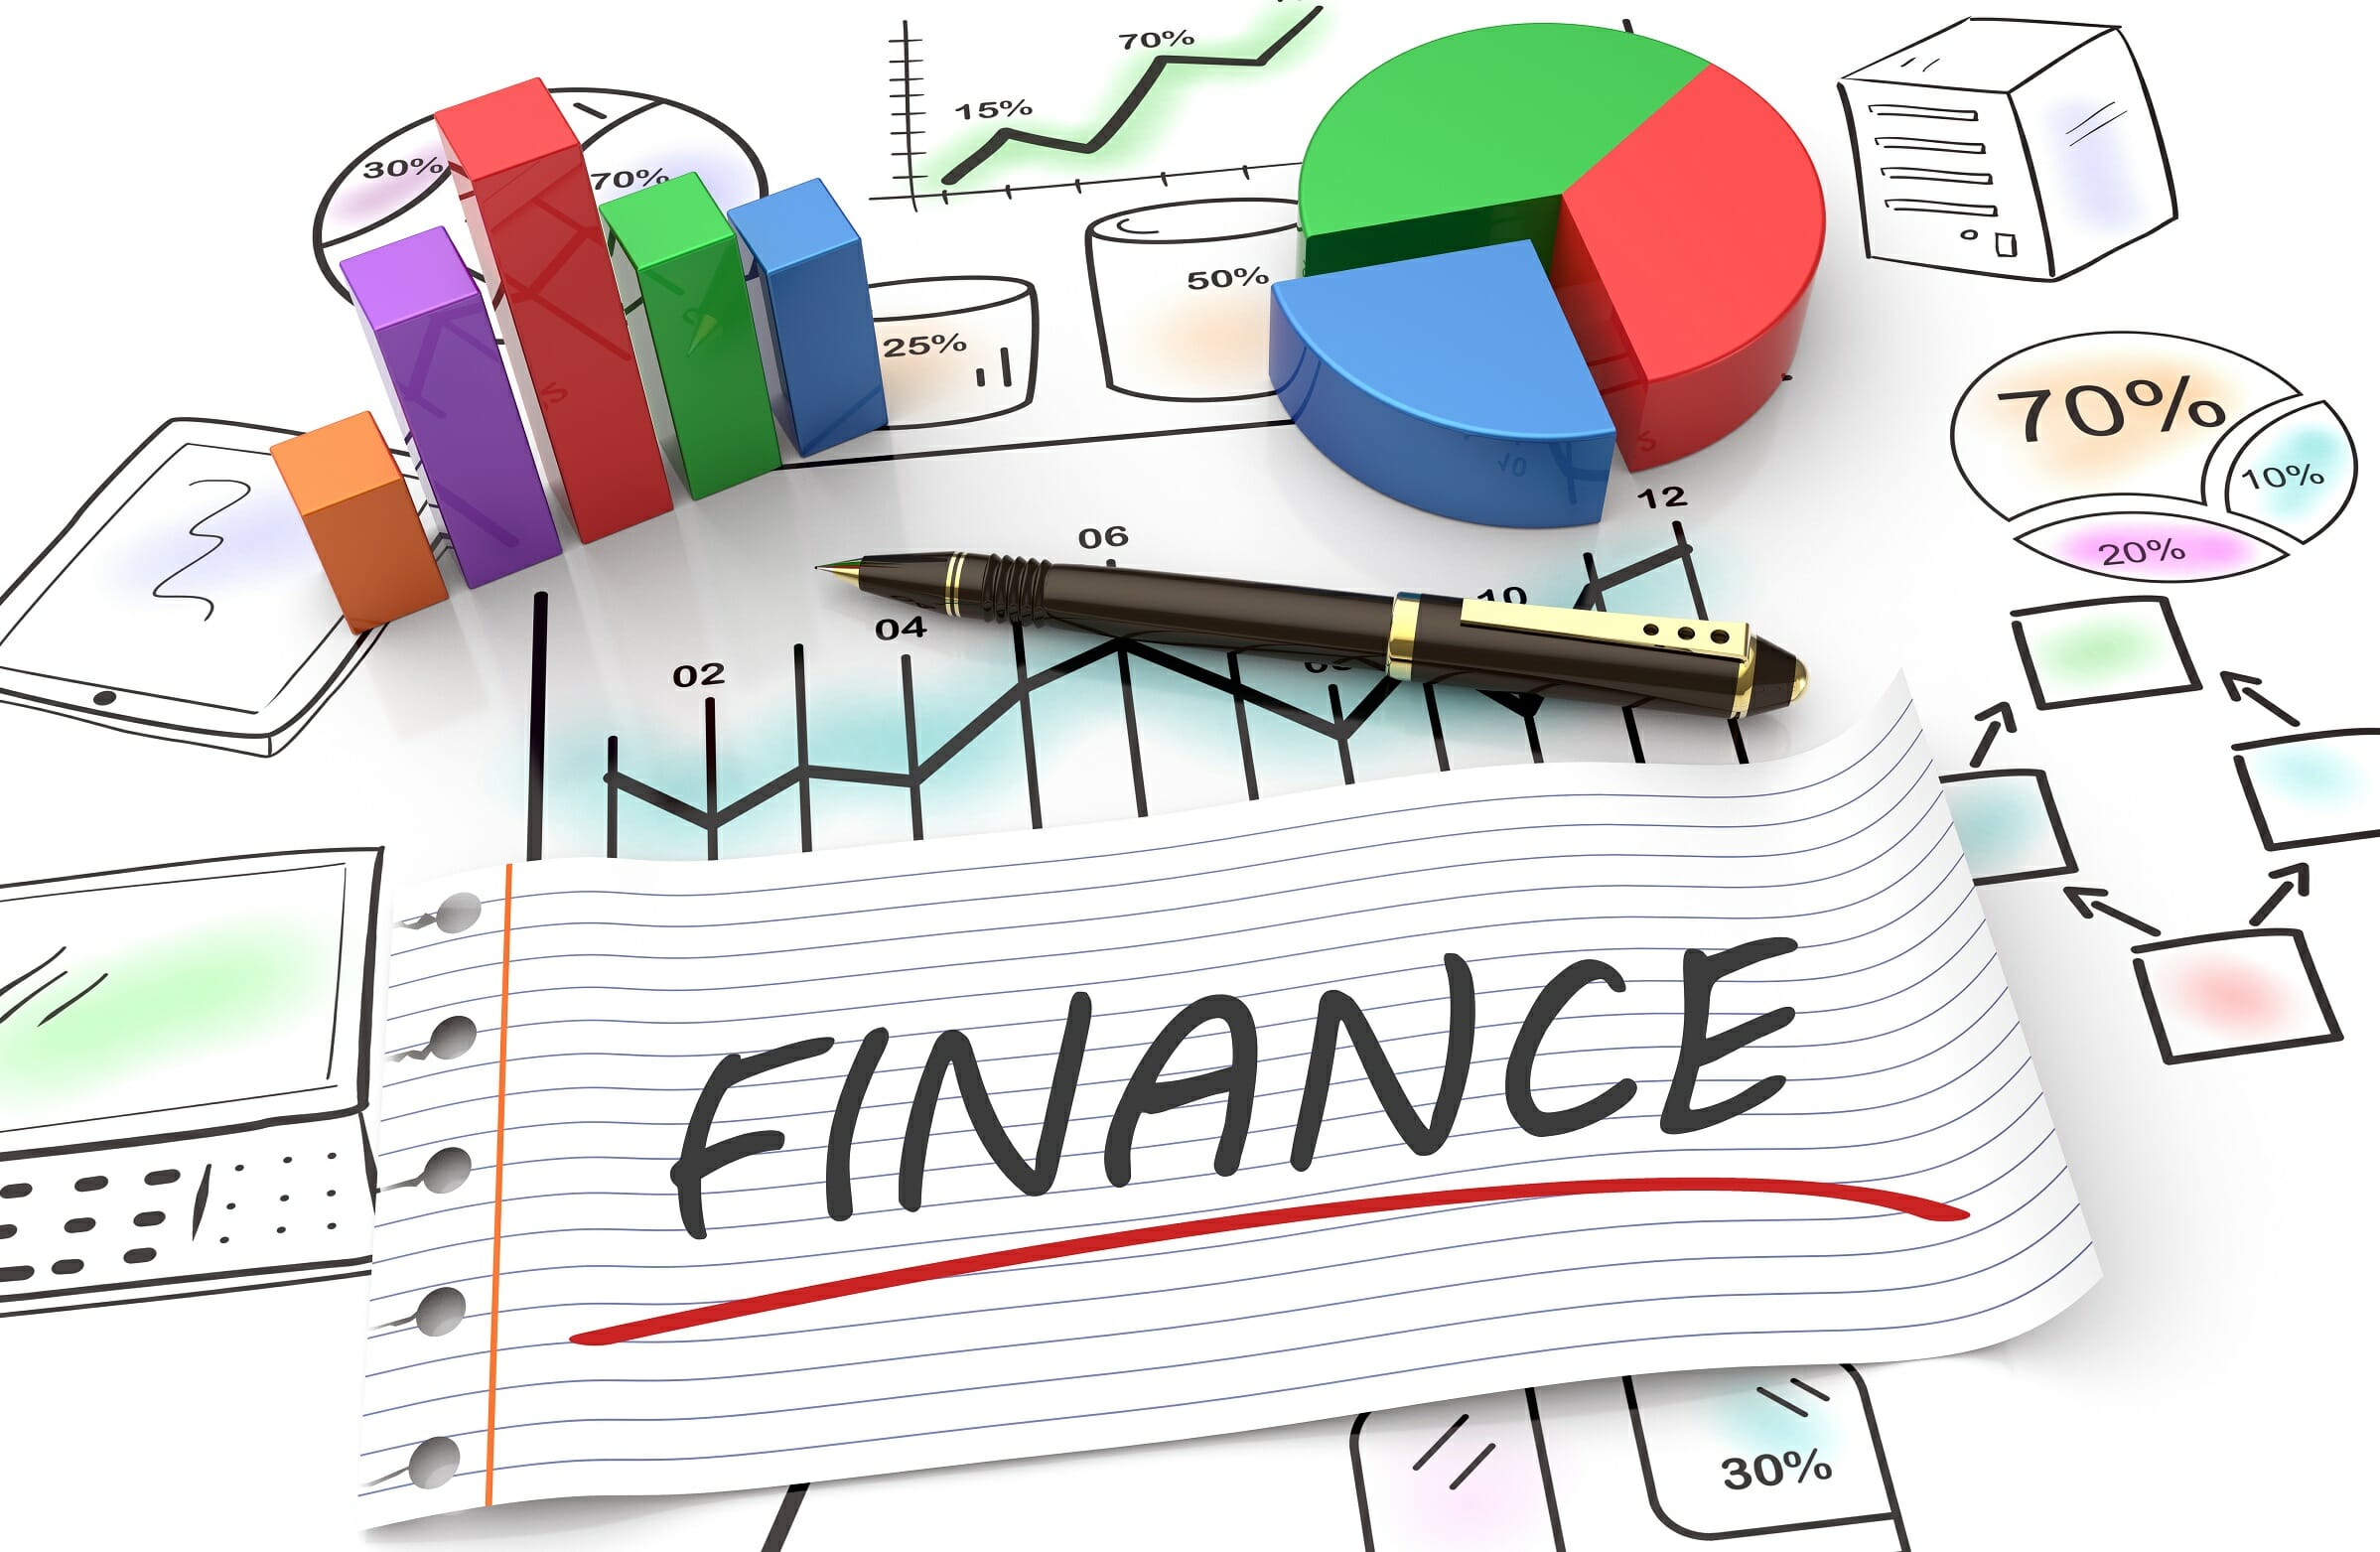 How To Promote The Finance Sector Through Digital Marketing?